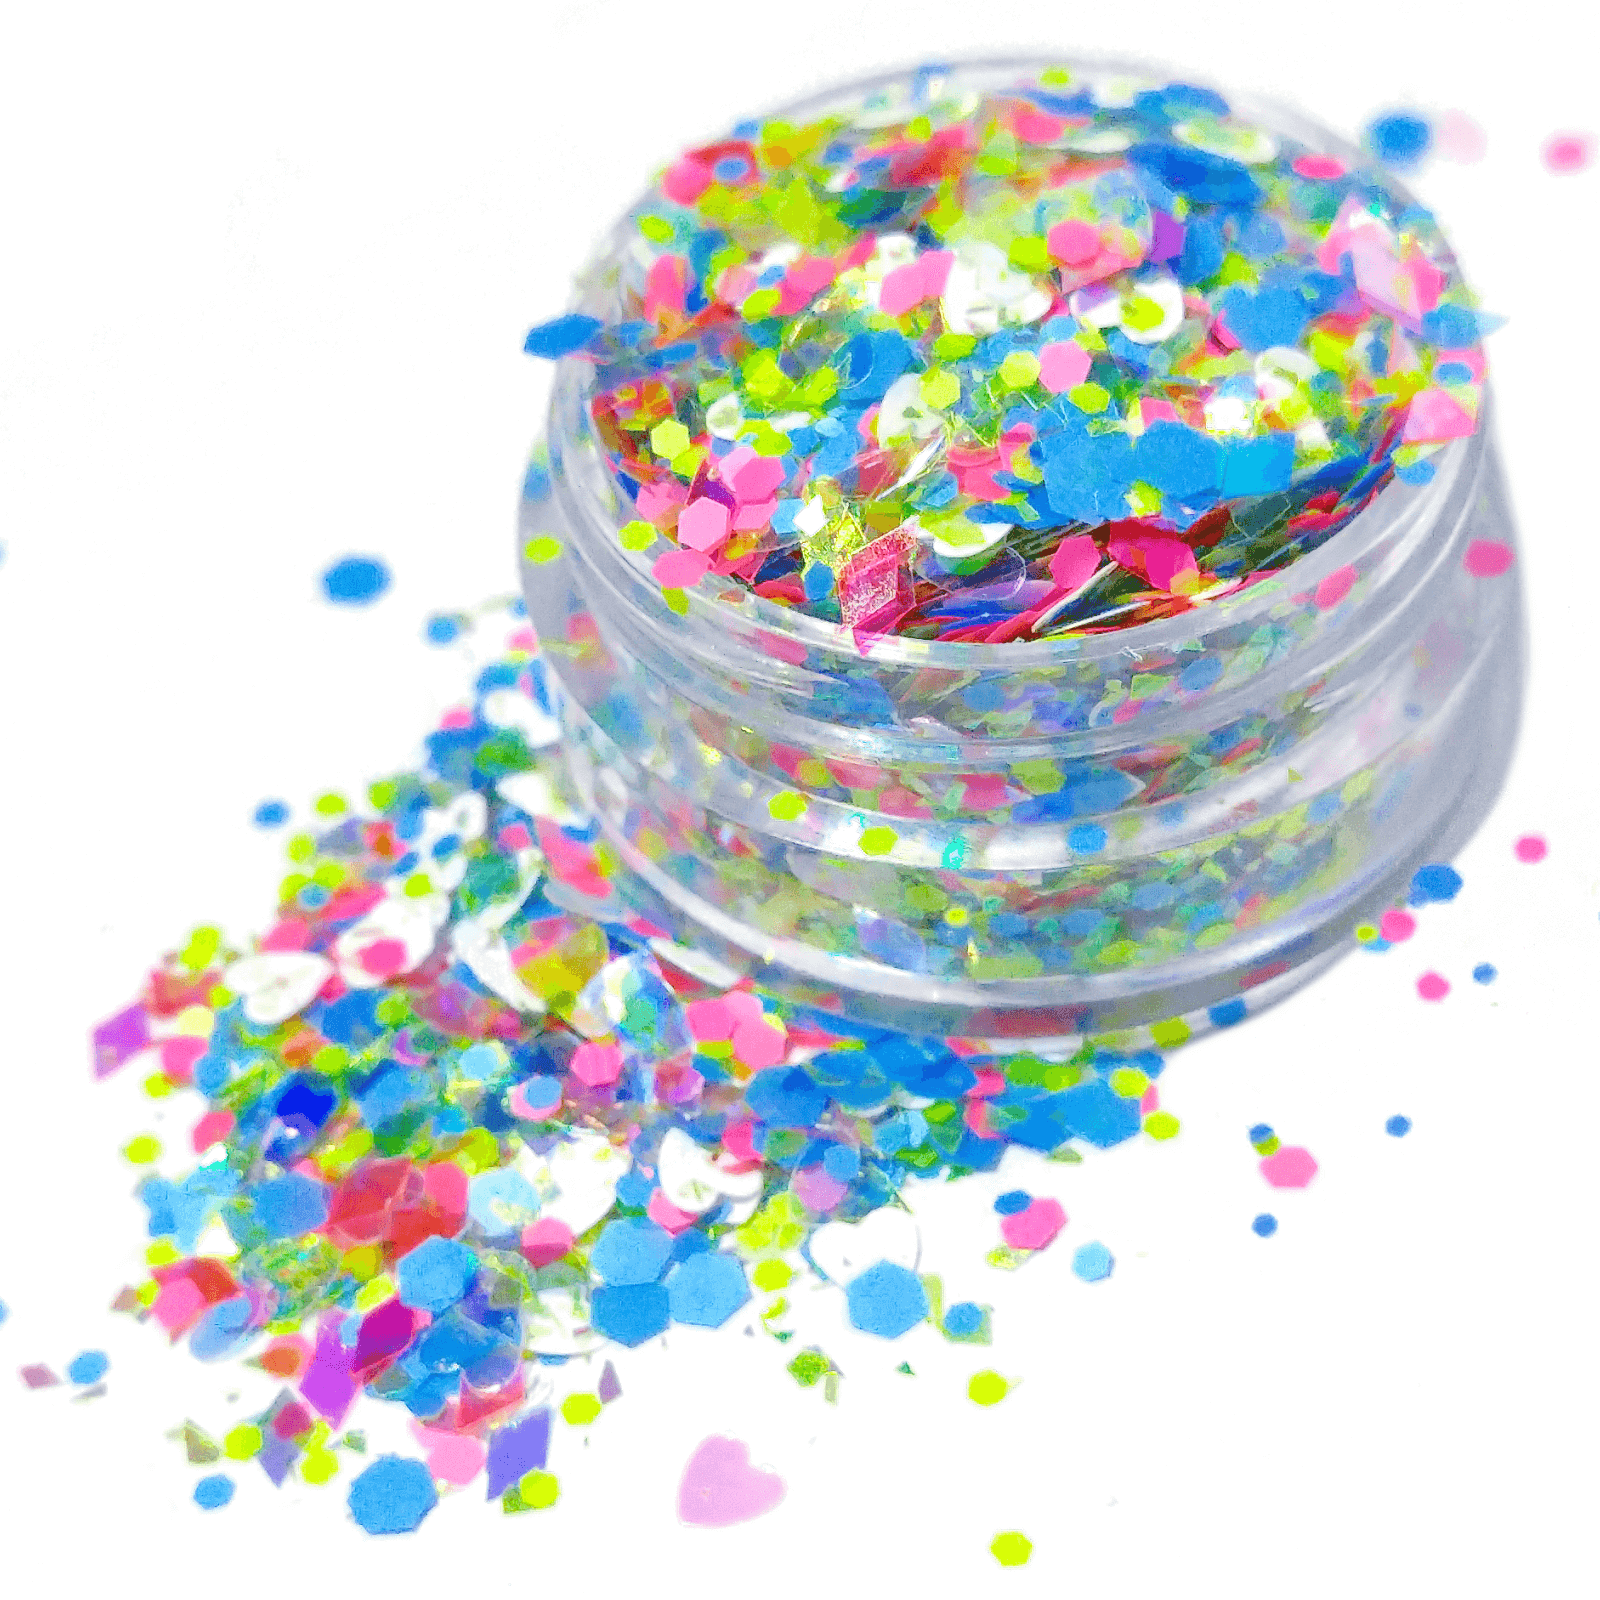 Neon Chunky Blacklight Activated Glitter Mix By Crazoulis Glitter